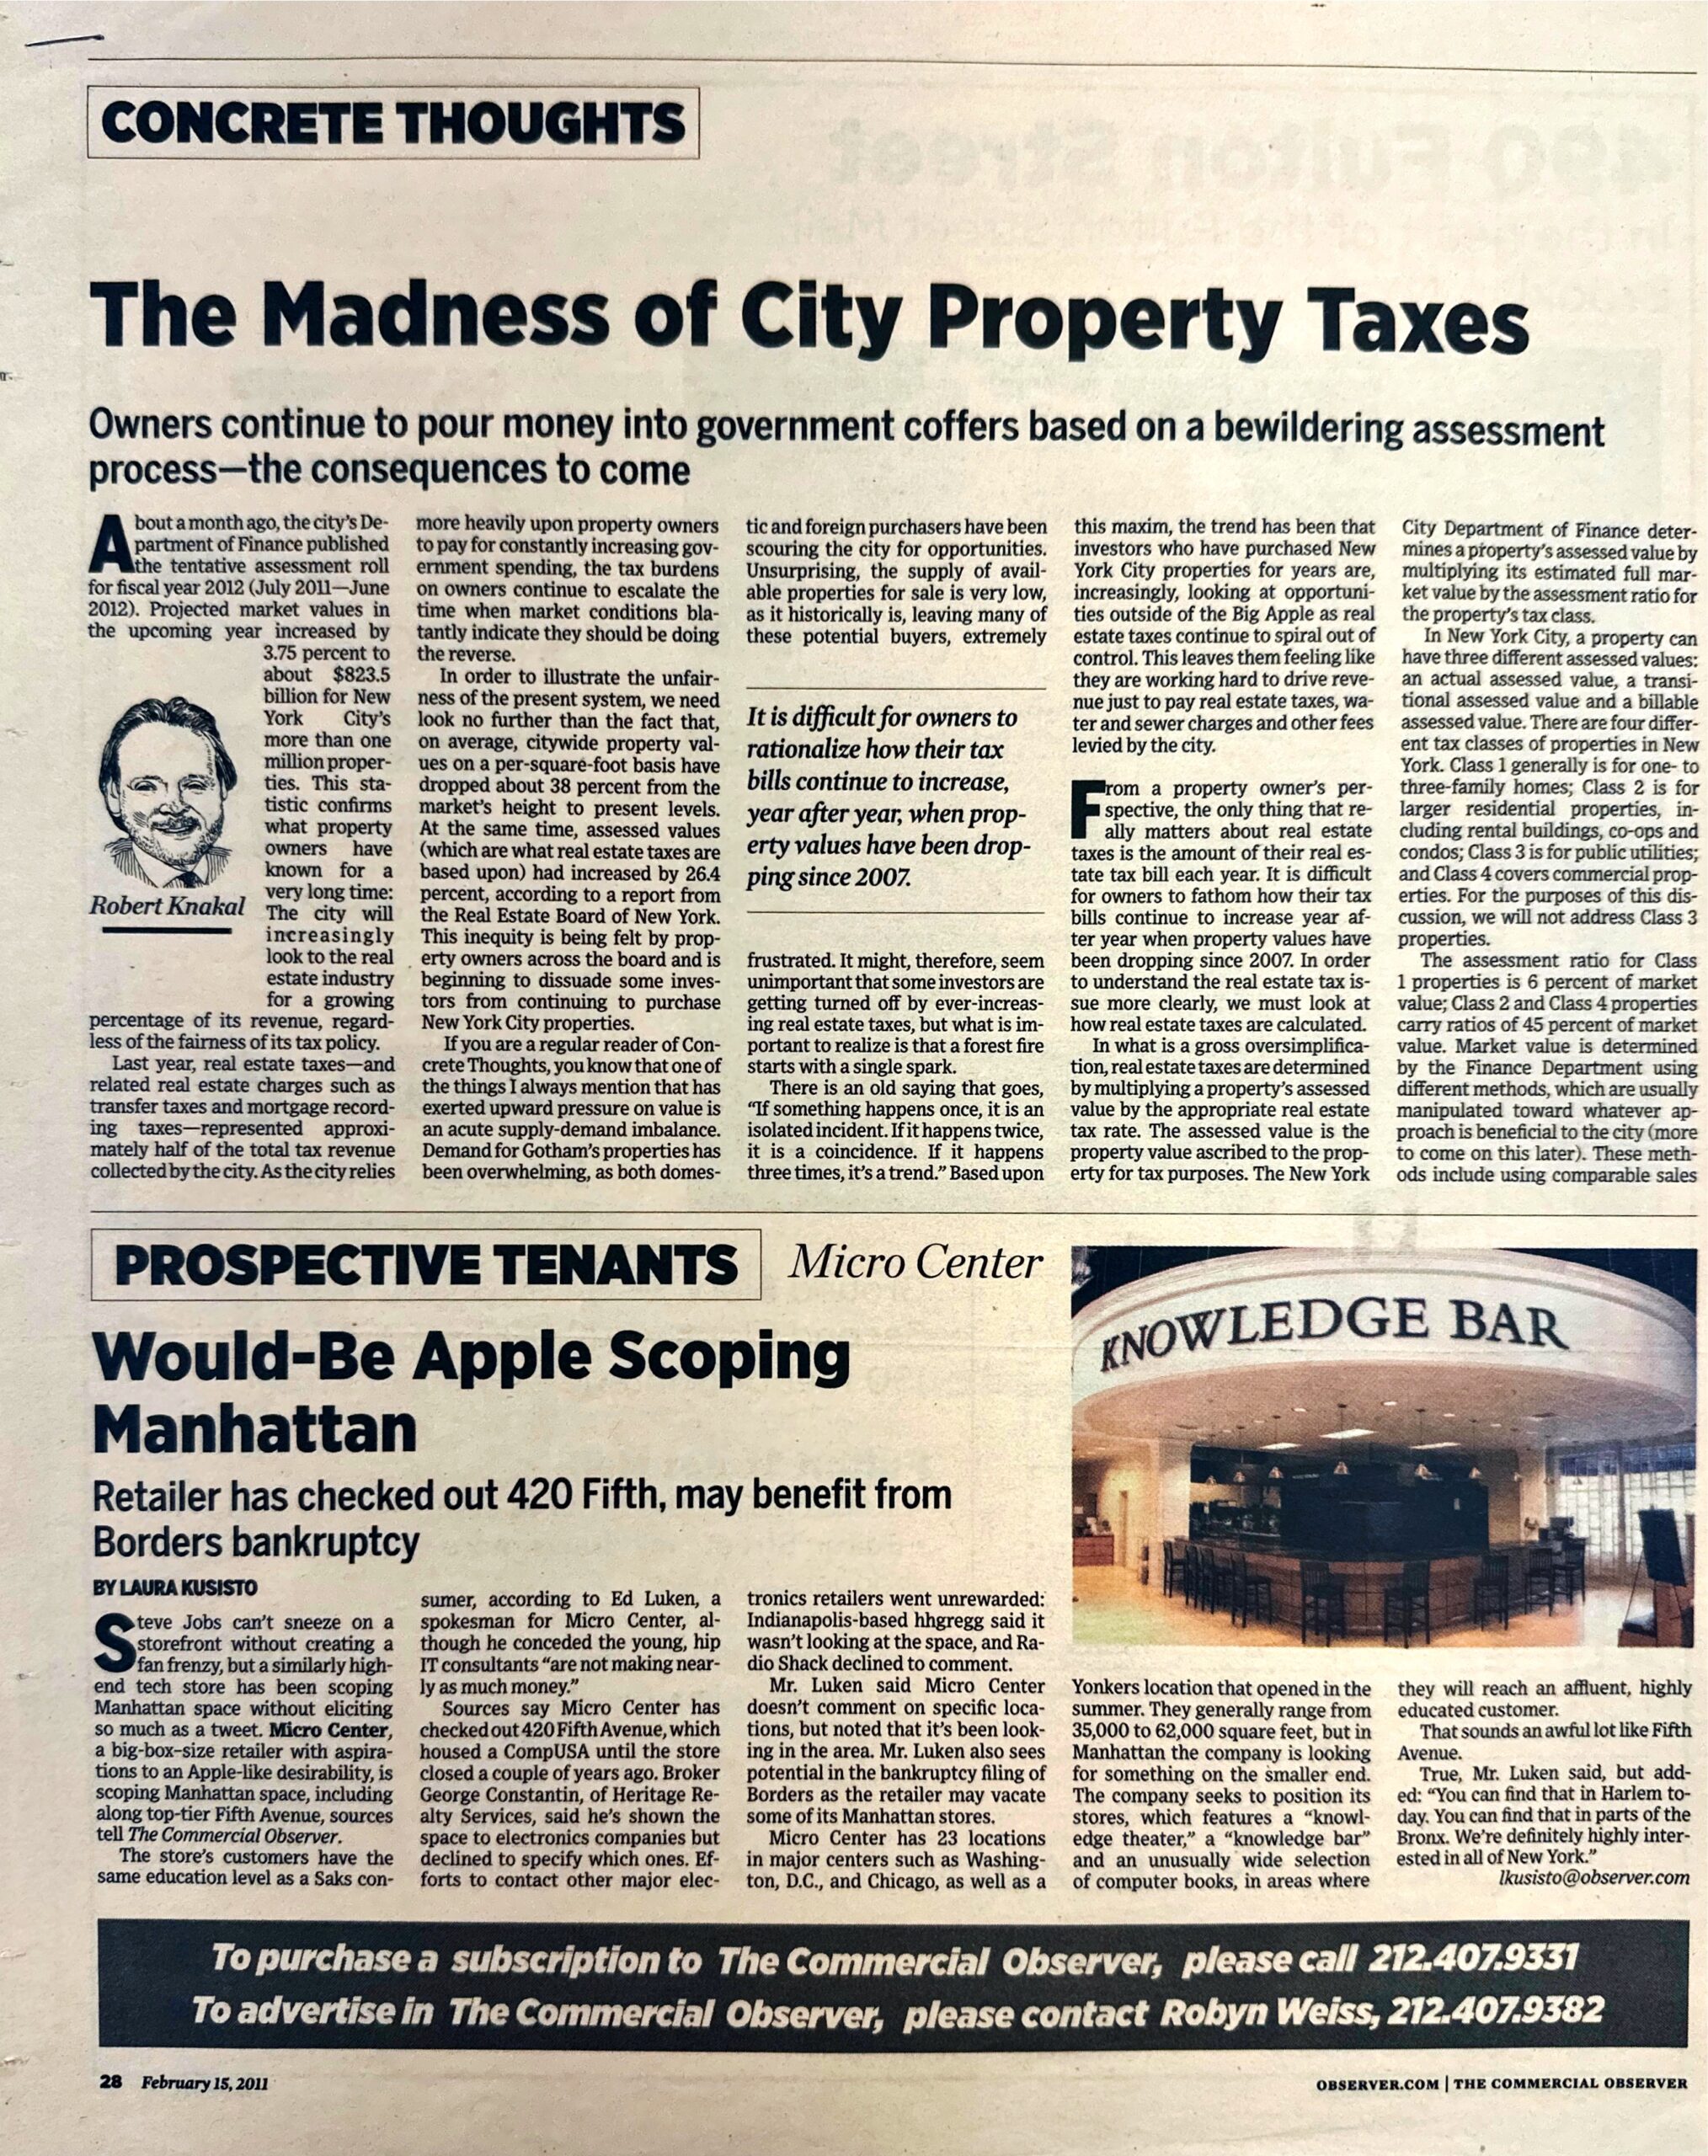 2-15 Concrete Thoughts - The Madness of City Property Taxes - Feb 15 2011